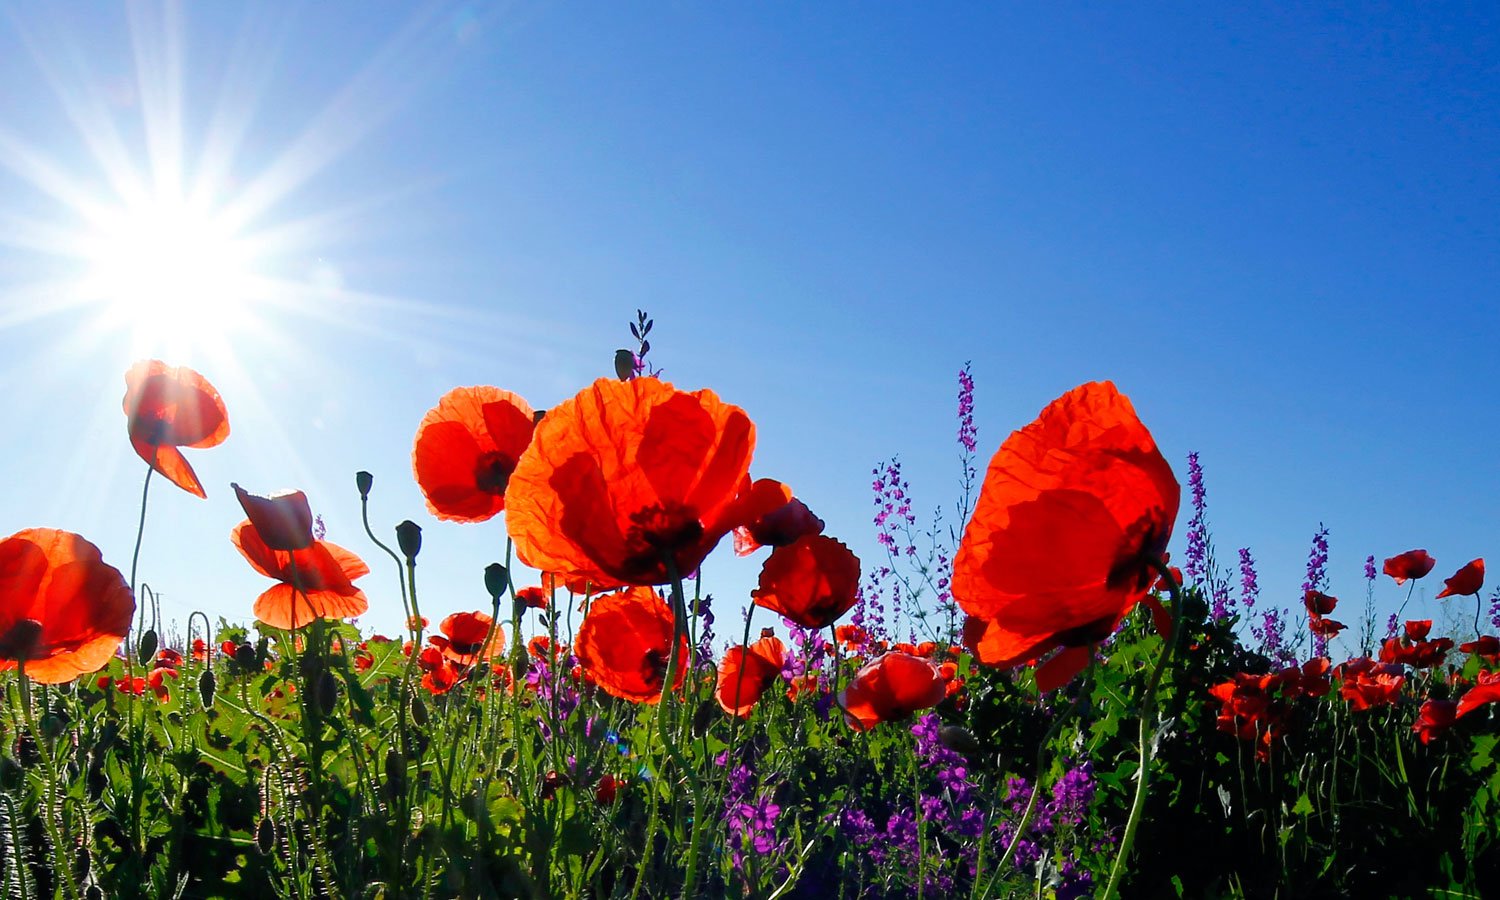 ANZAC Centenary Services In Ryde